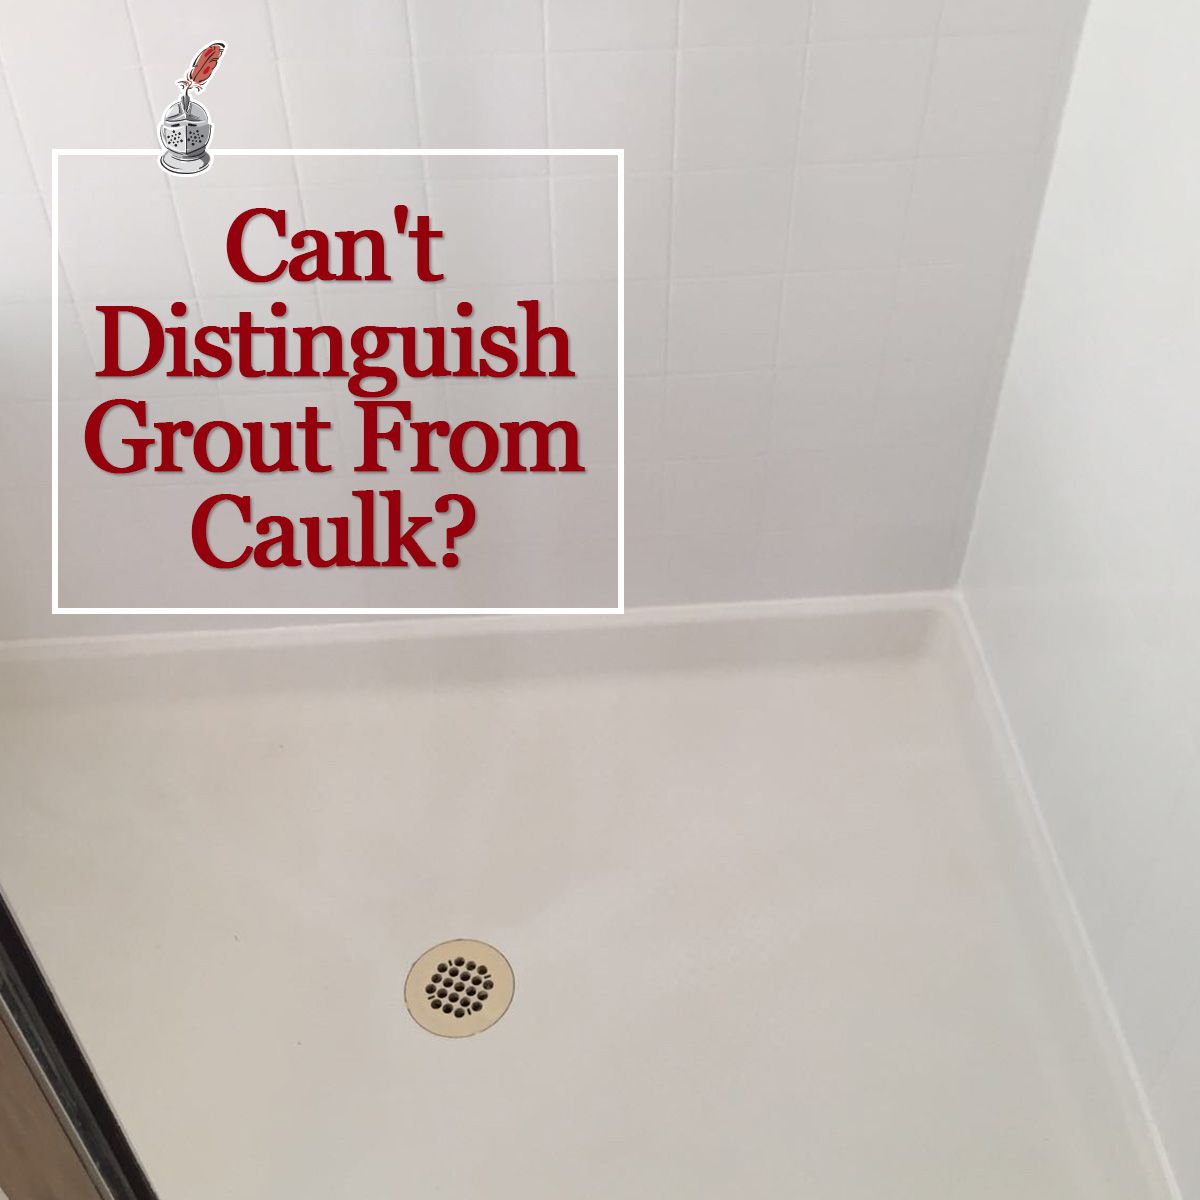 Can't Distinguish Grout From Caulk